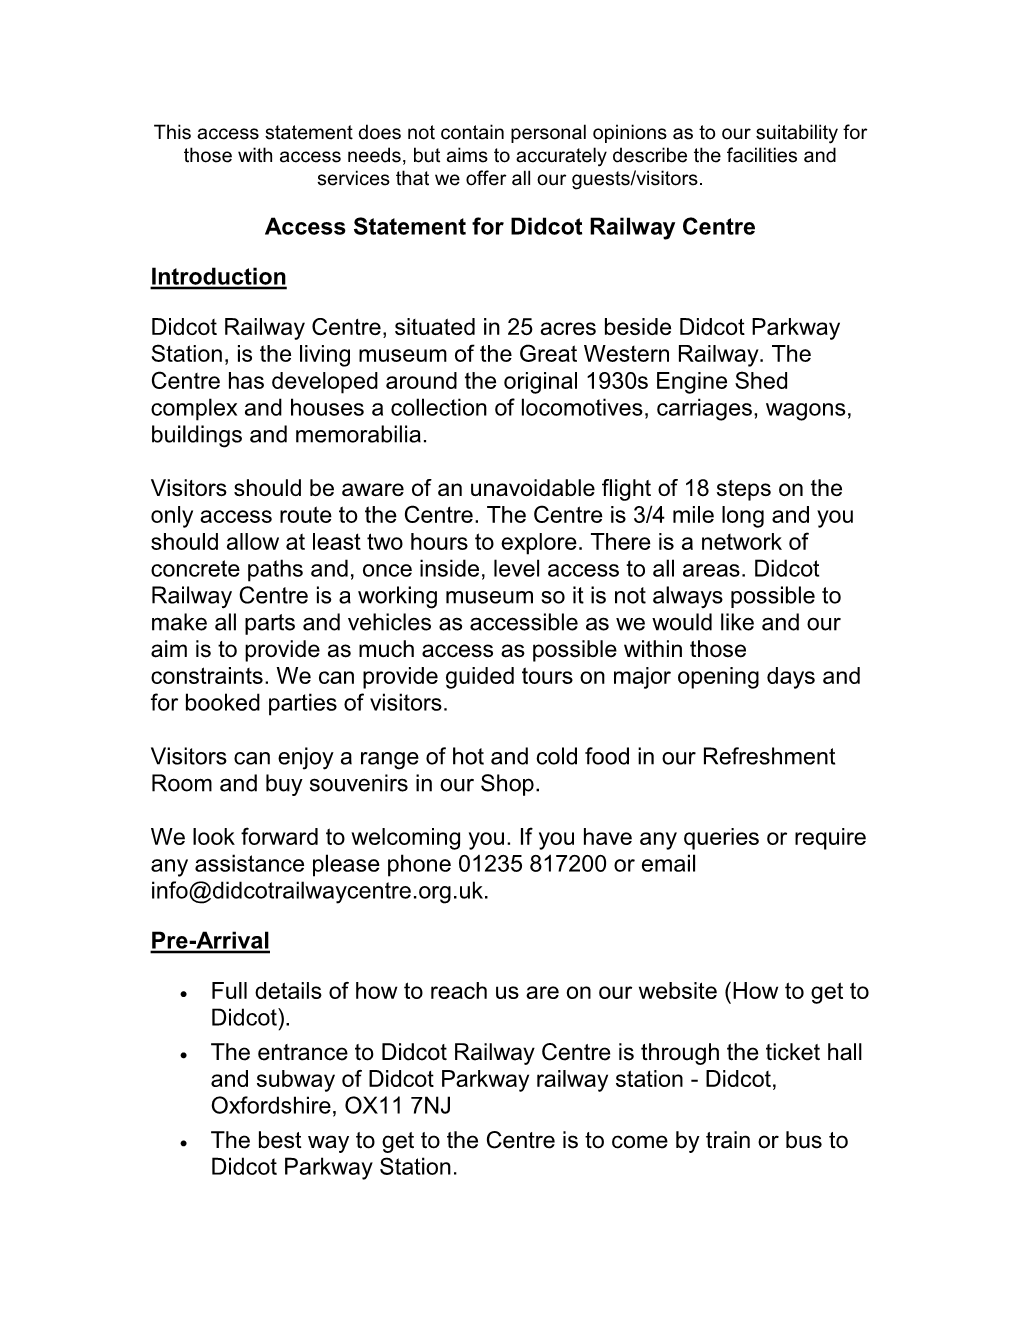 Access Statement for Didcot Railway Centre